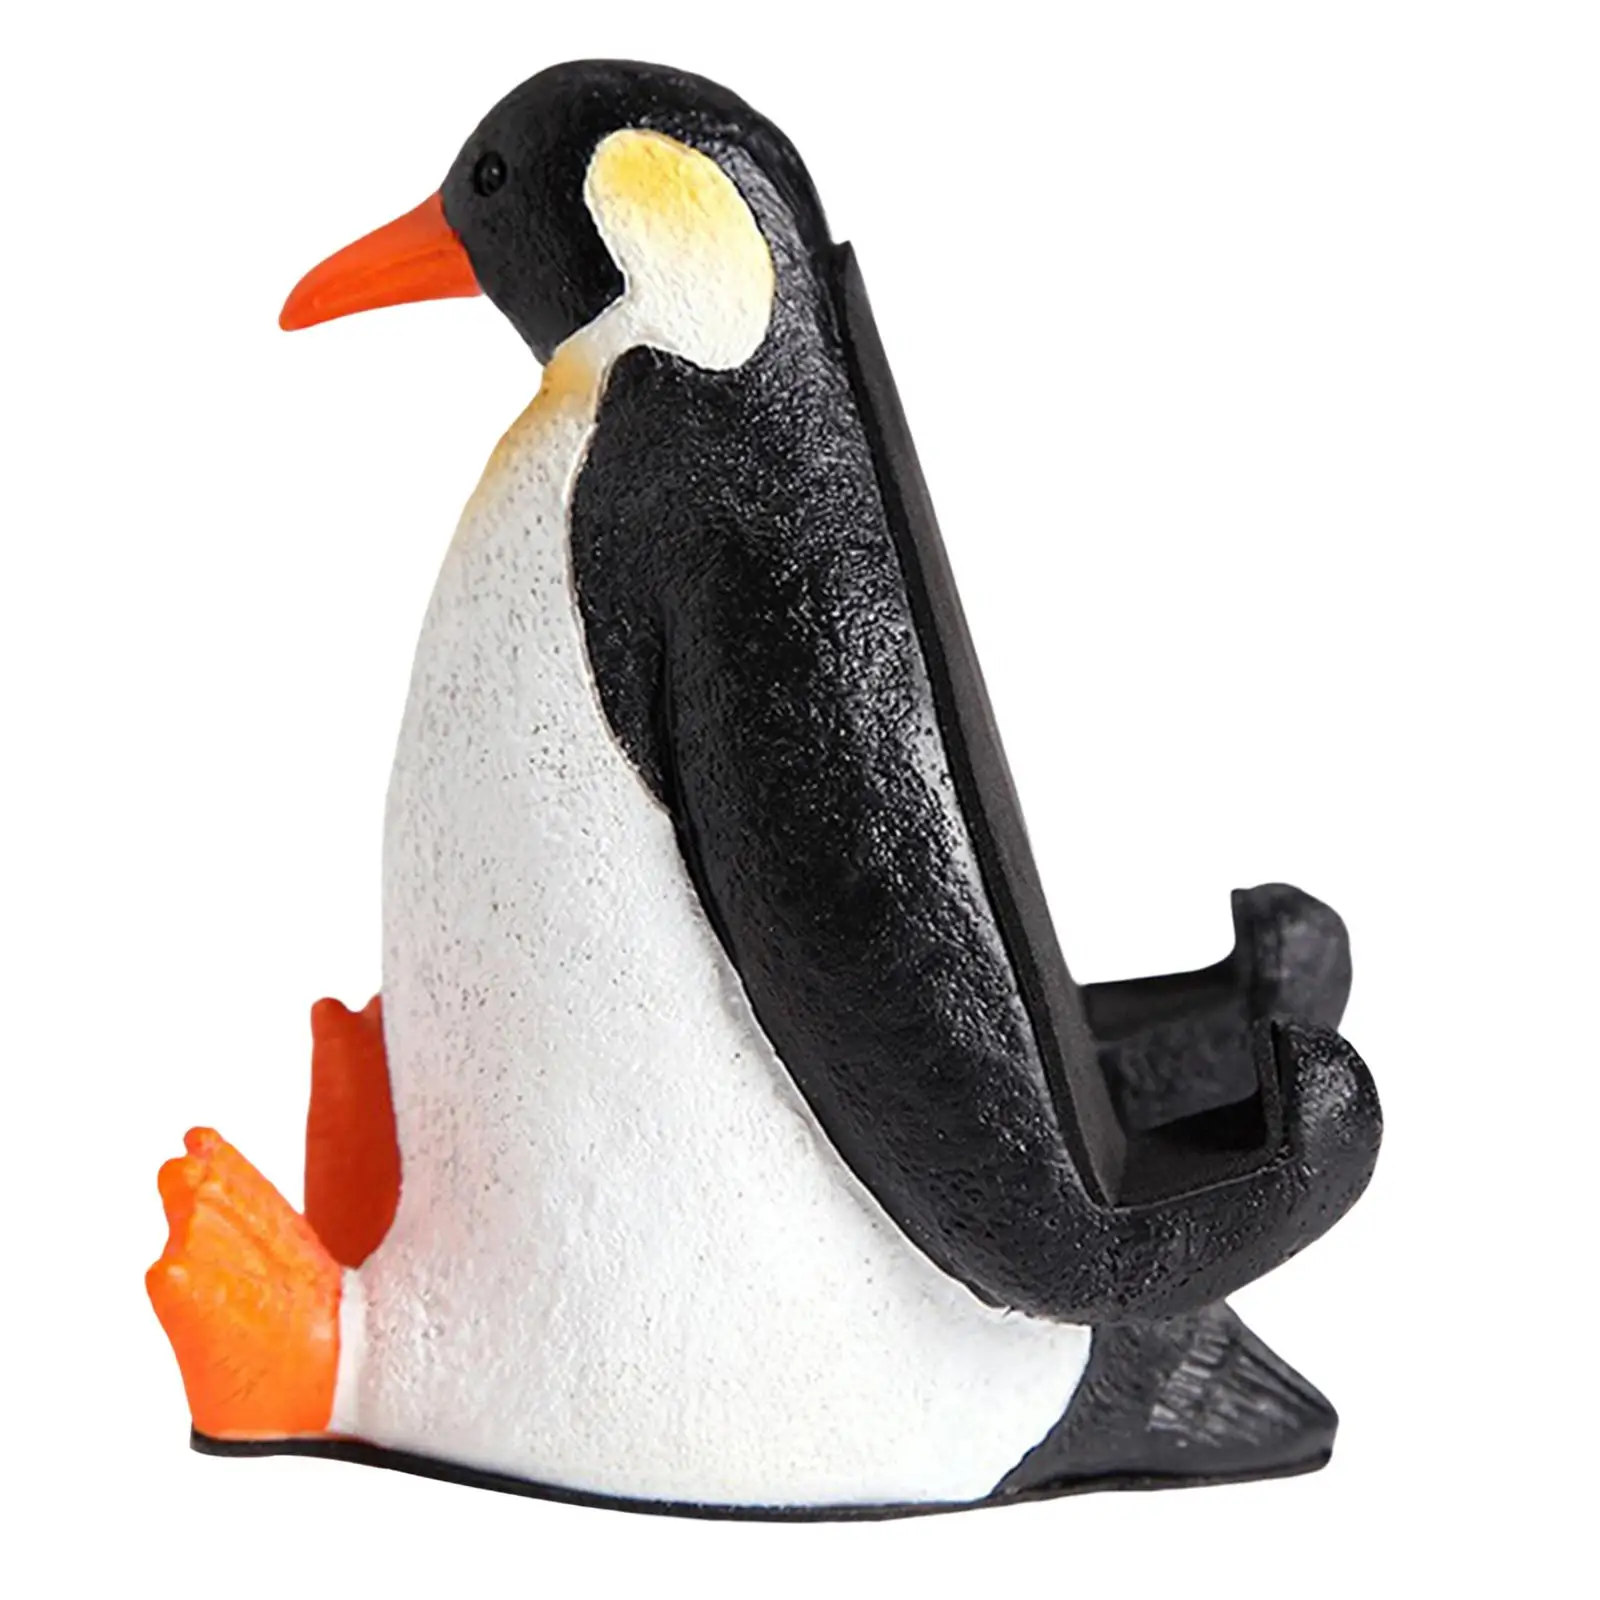 Creative Animal Penguin Statue Desktop Phone Holder Stand Support Cradle Crafts Ornaments Decoration for Office Tabletop Home